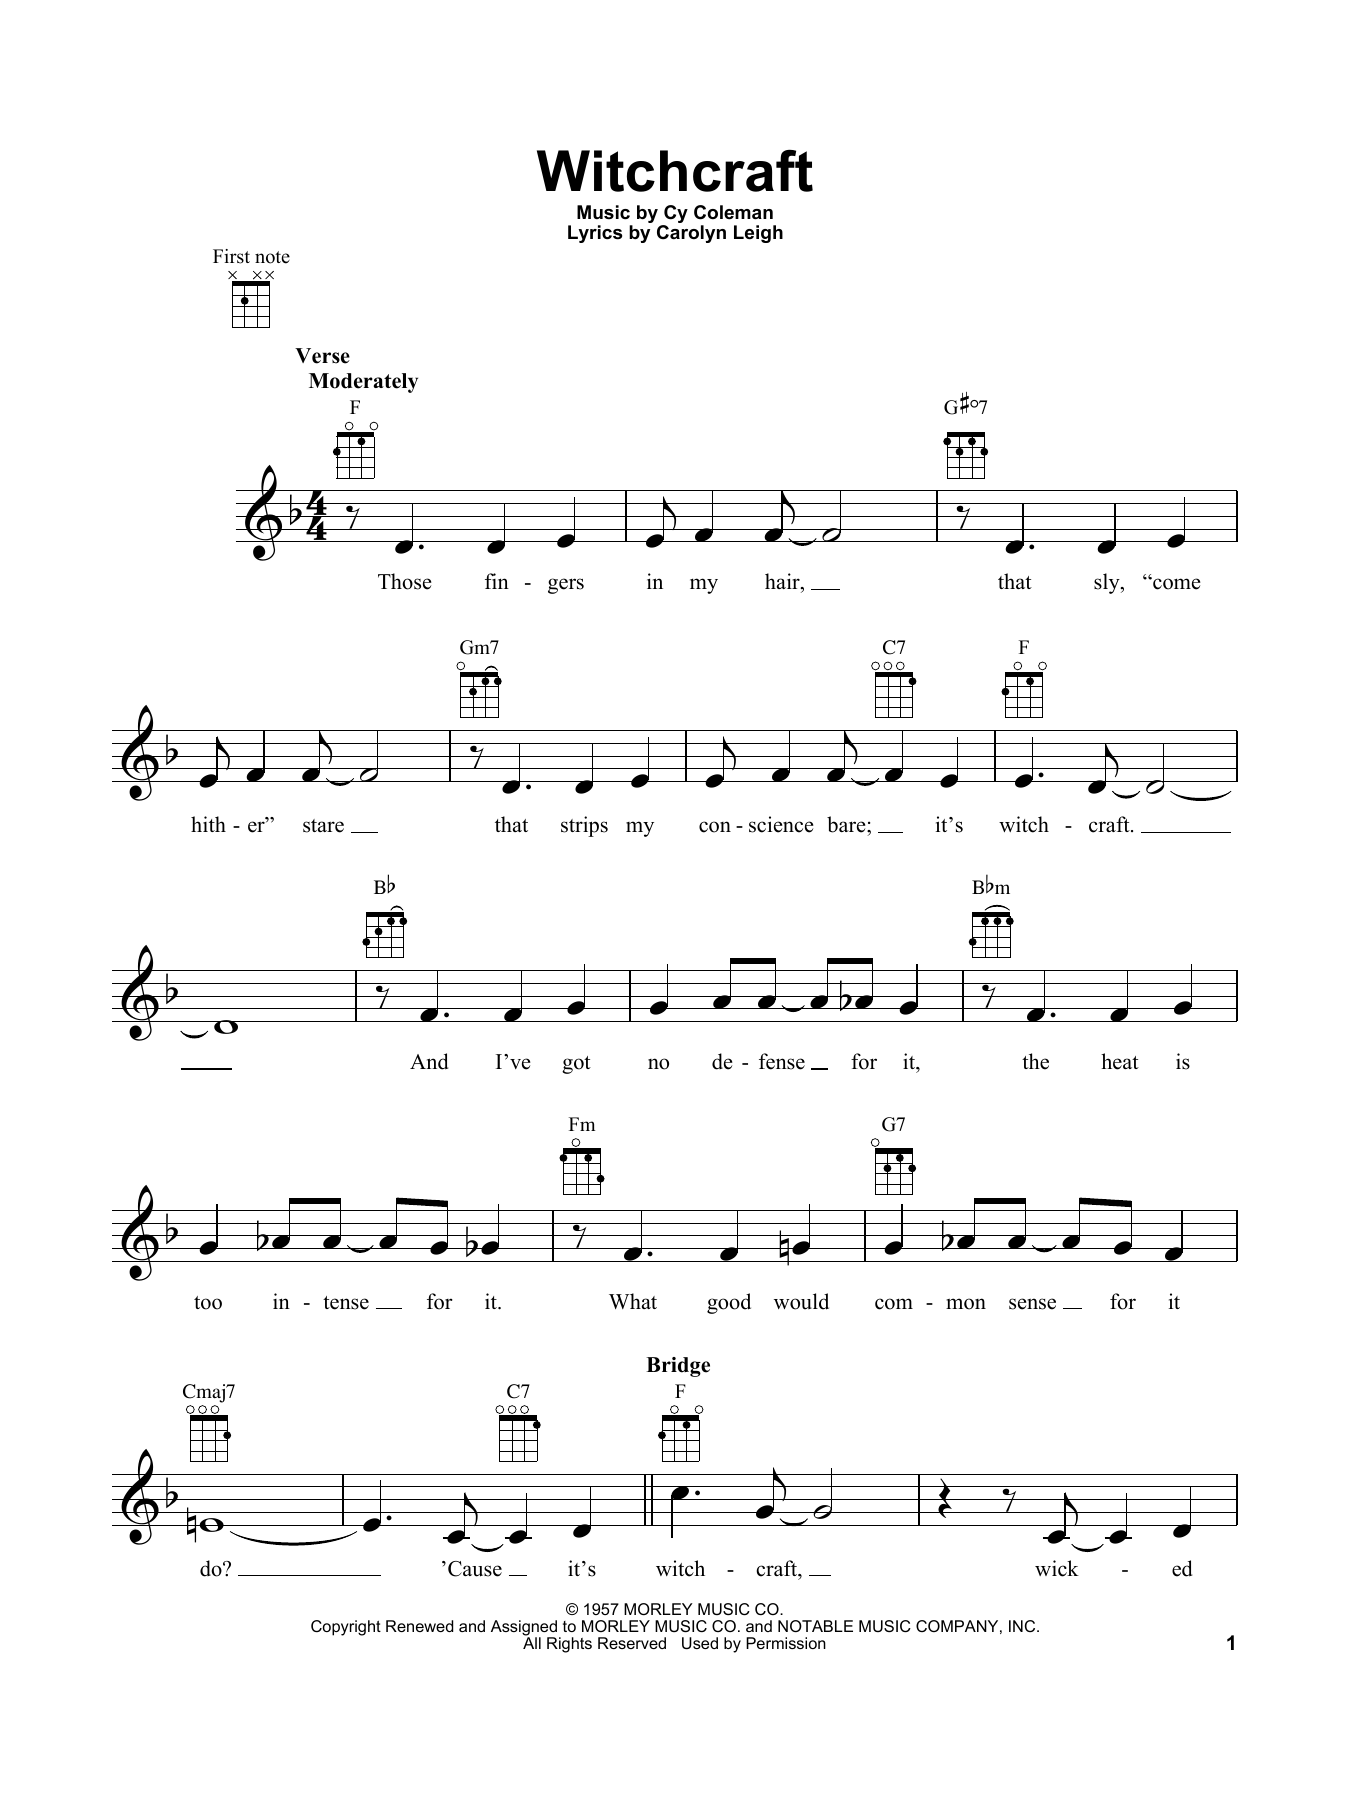 Download Carolyn Leigh Witchcraft Sheet Music